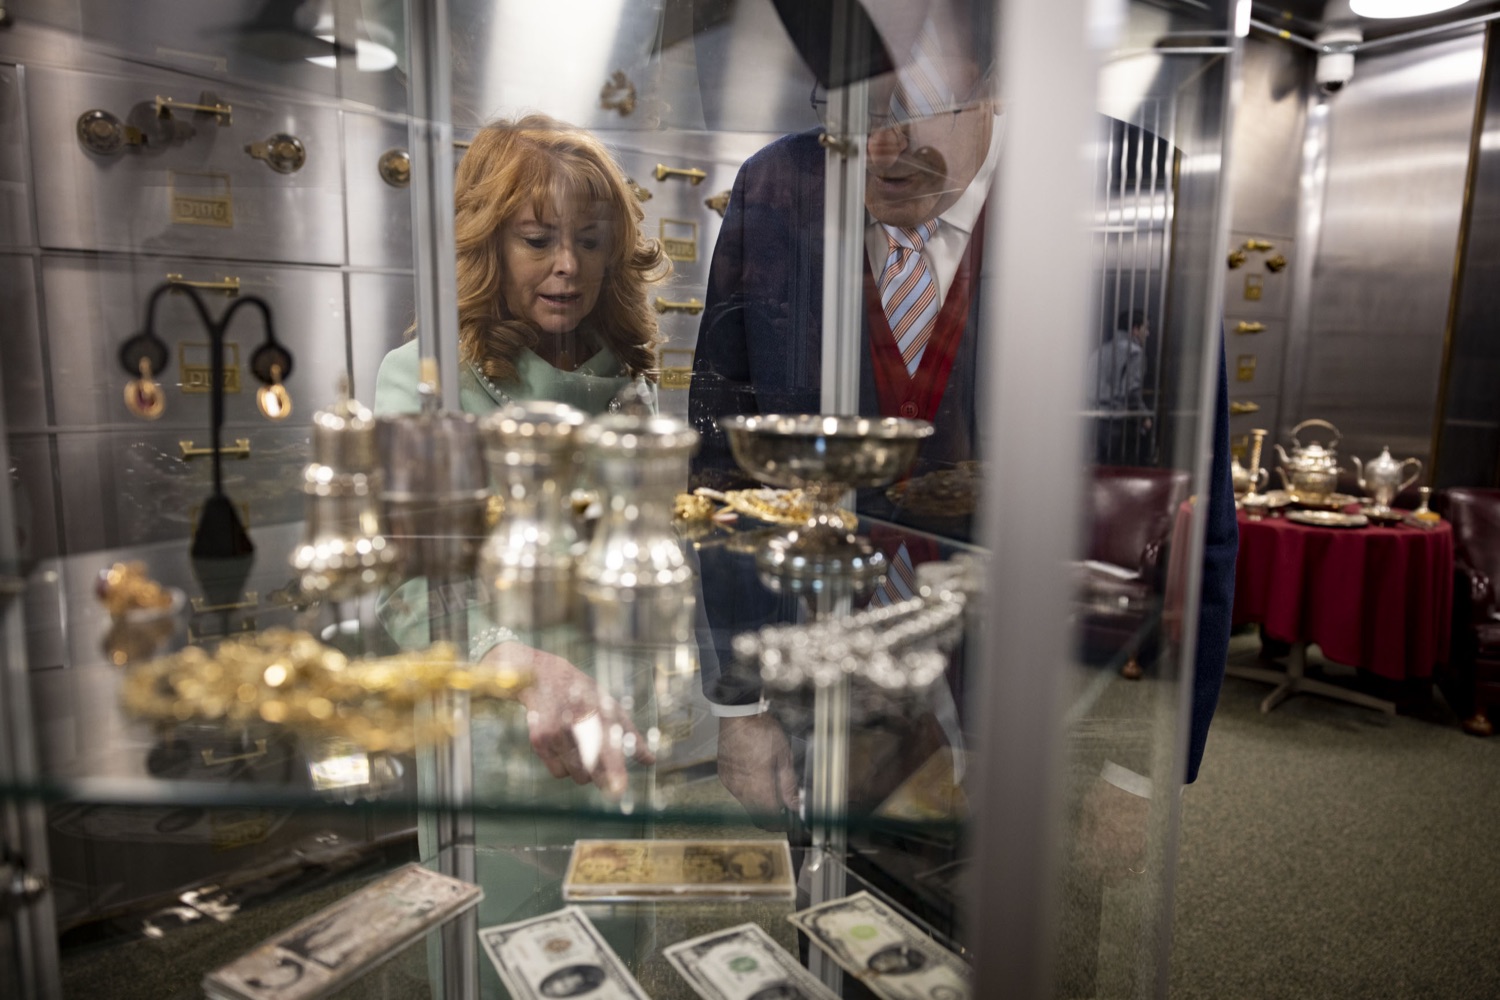 Pennsylvania Treasurer Stacy Garrity gives a tour of the Finance Building's historic vault, which stores tangible property reported to the Bureau of Unclaimed Property, including gold, collectibles, and military decorations, in Harrisburg, PA on March 15, 2023.<br><a href="https://filesource.amperwave.net/commonwealthofpa/photo/22711_treas_vault_cz_13.jpg" target="_blank">⇣ Download Photo</a>